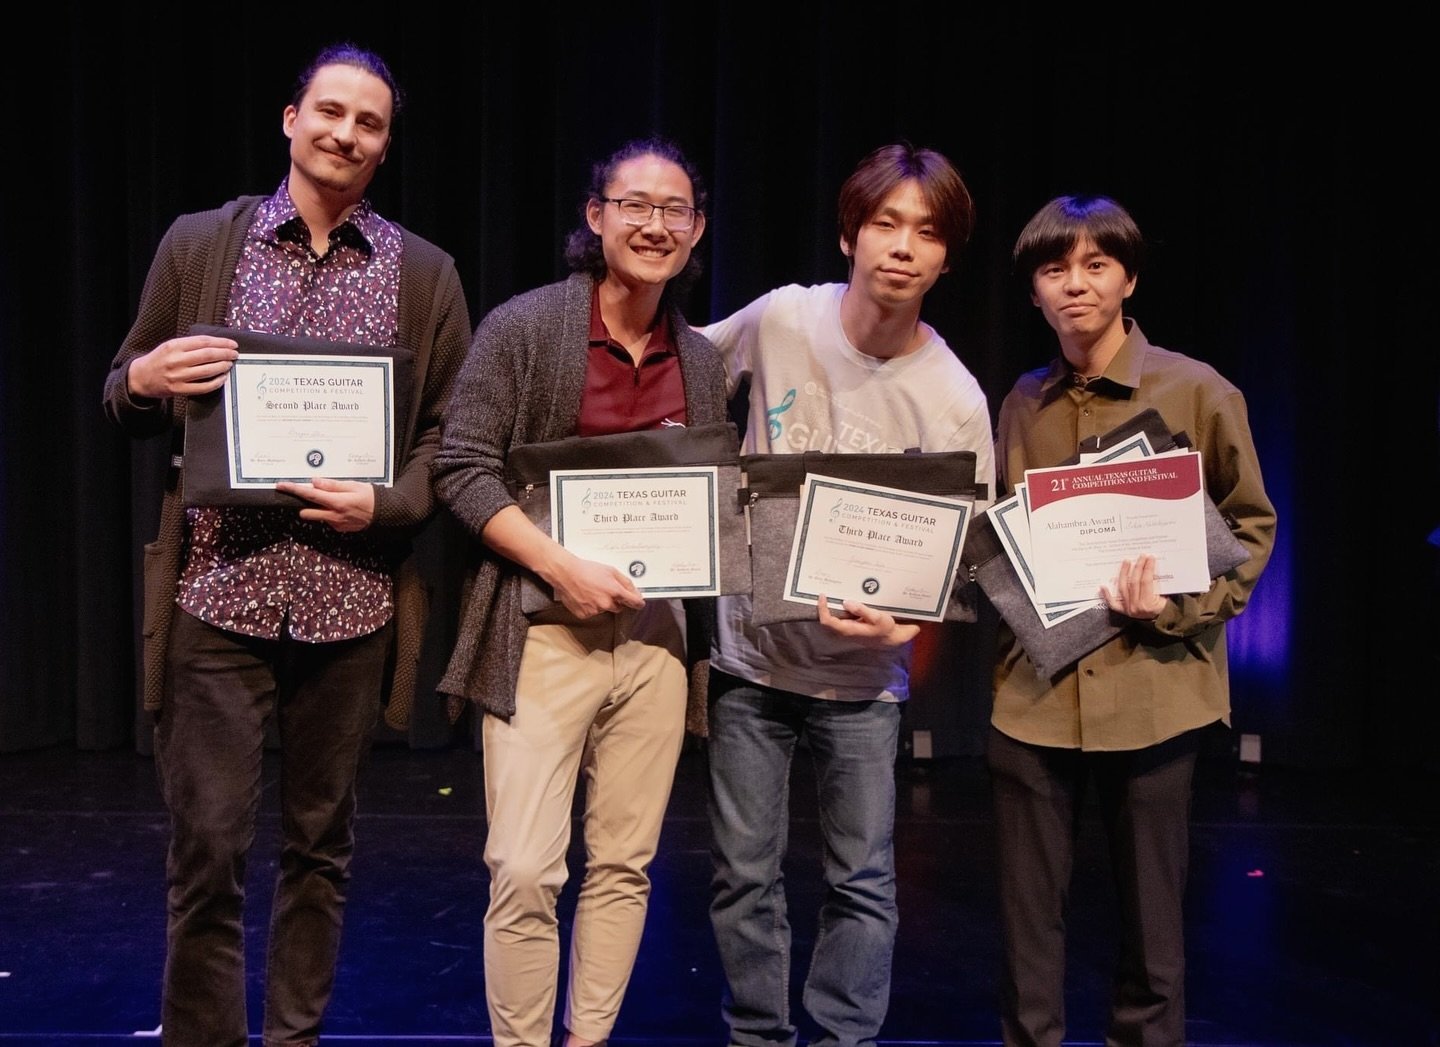 Earlier this month, first-year graduate student @kyle.khembo was awarded third place in the Texas Guitar Competition alongside @jiujiu_wu! Congratulations Kyle, and bravo to all of the finalists! 🎊 

@uwmilwaukee @uwmpsoa #music #musician #classical